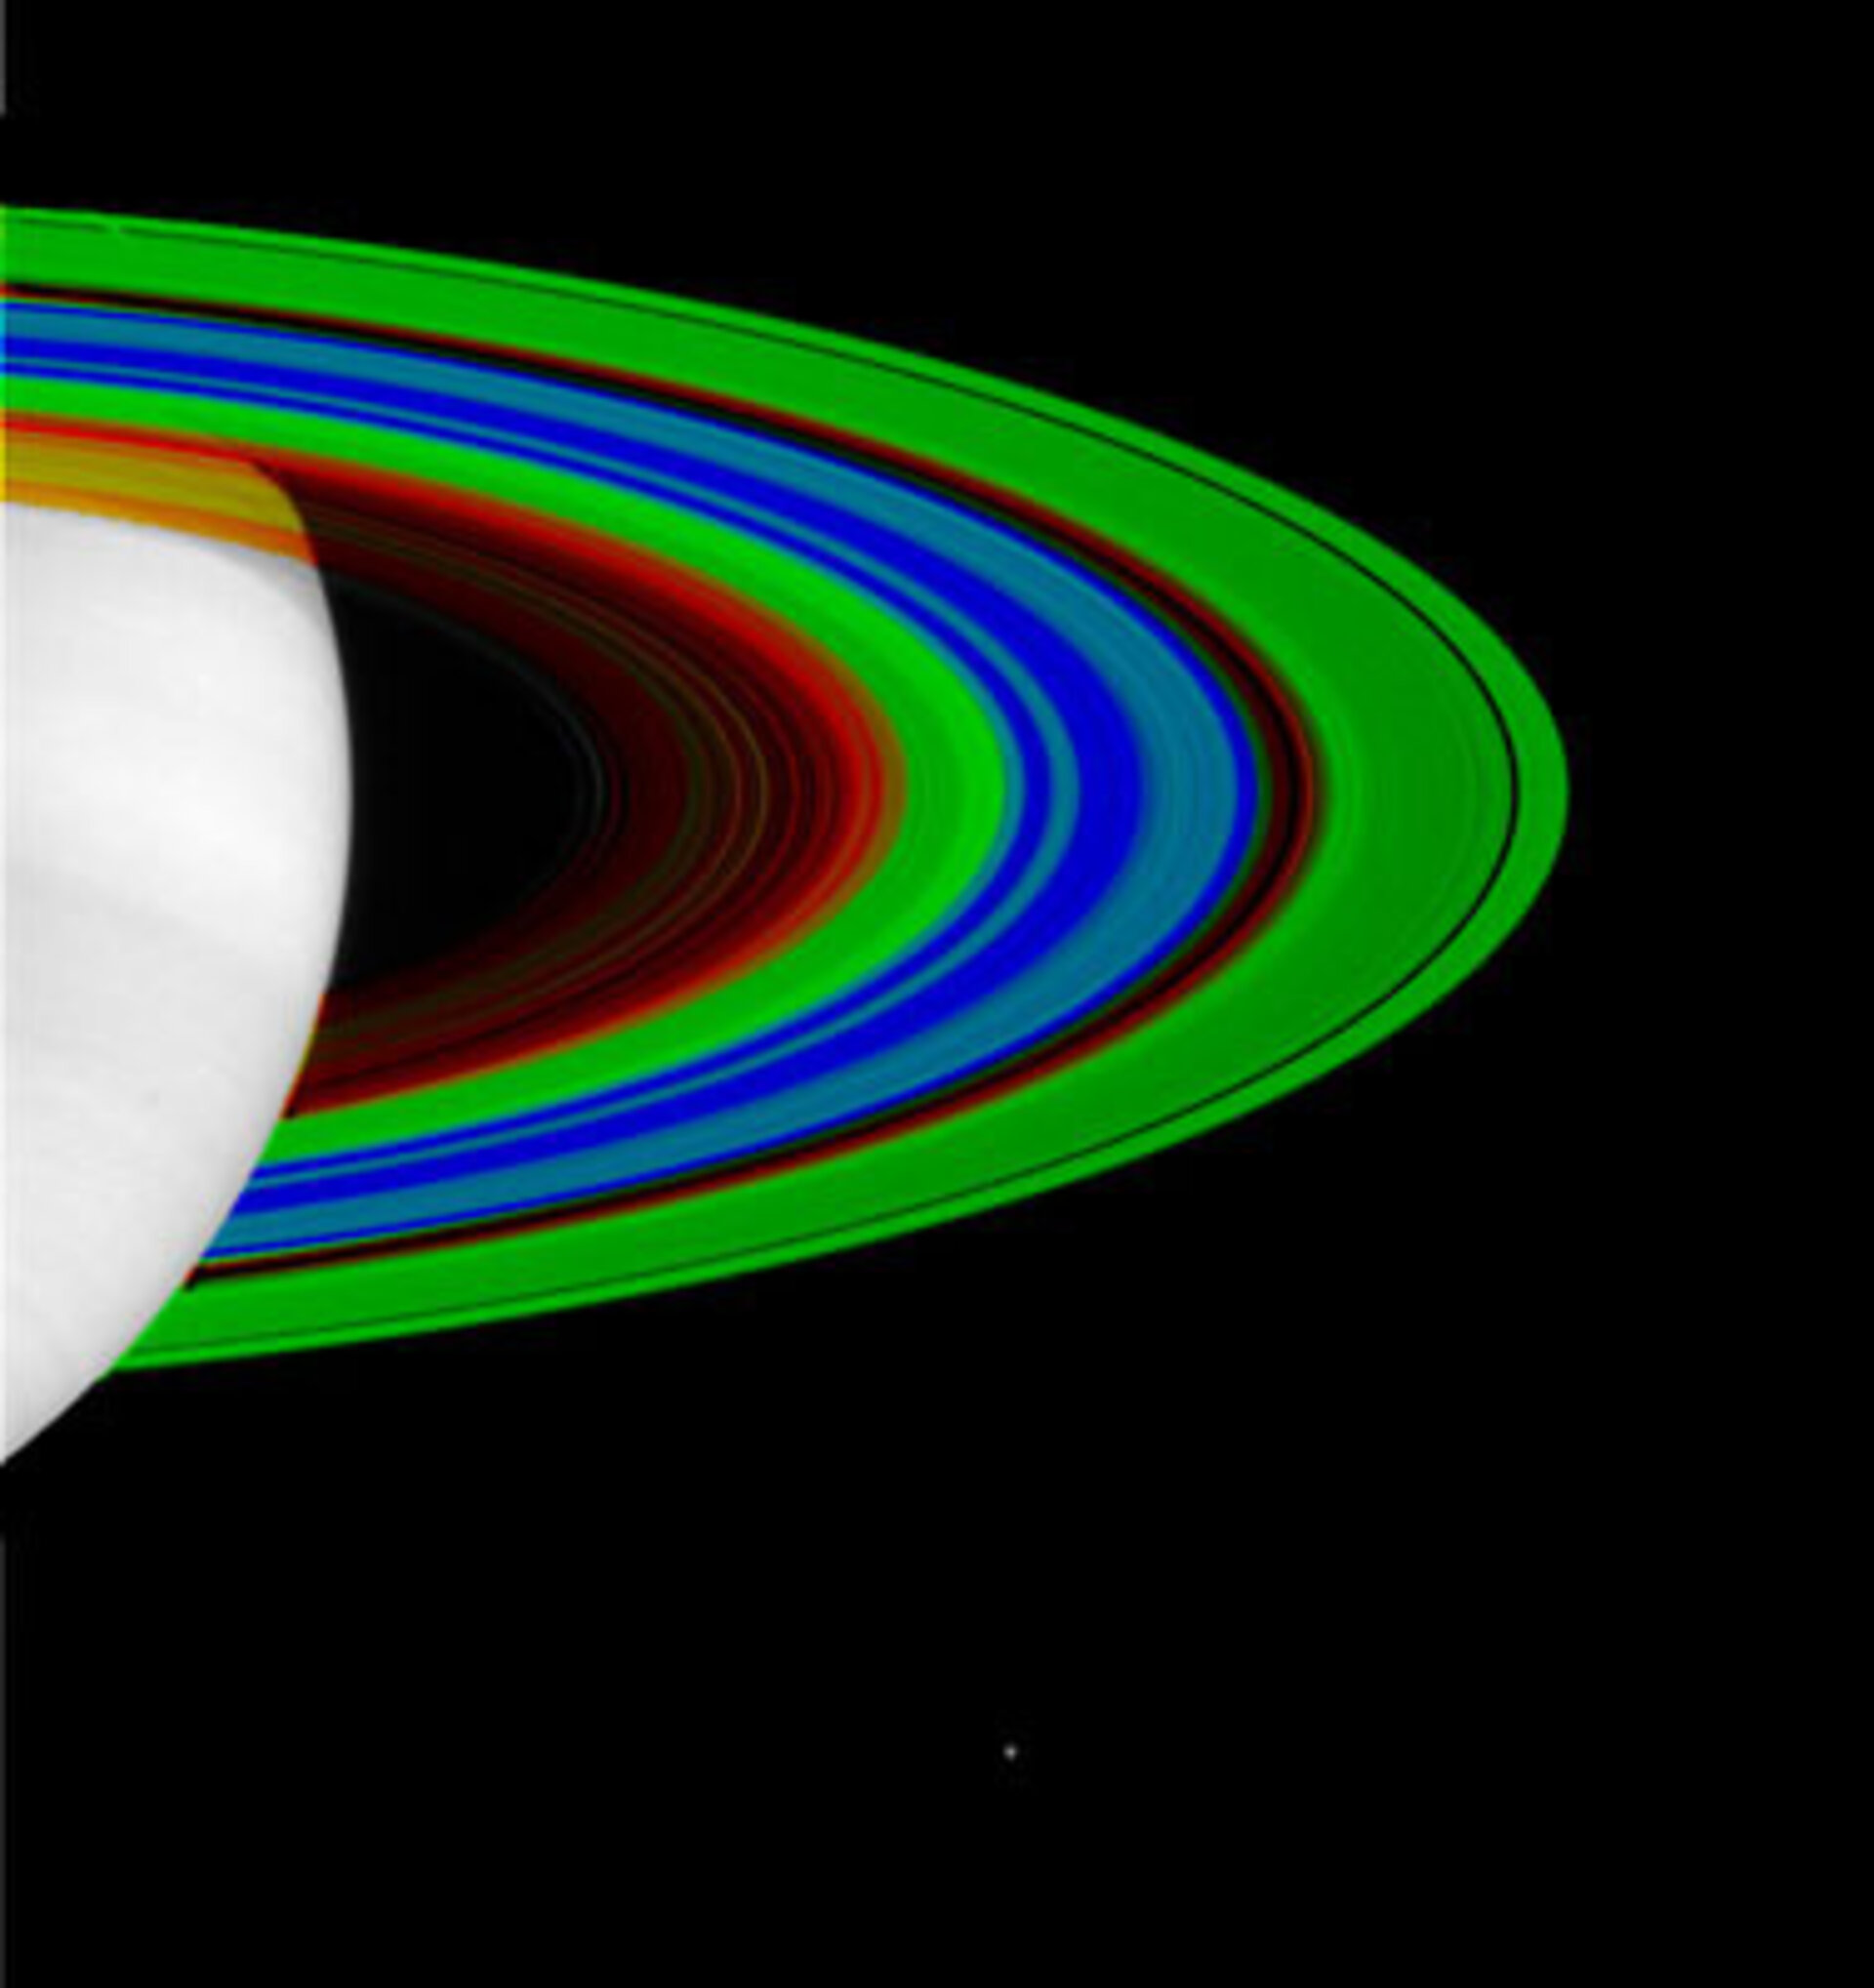 Saturn's rings: cold and colder